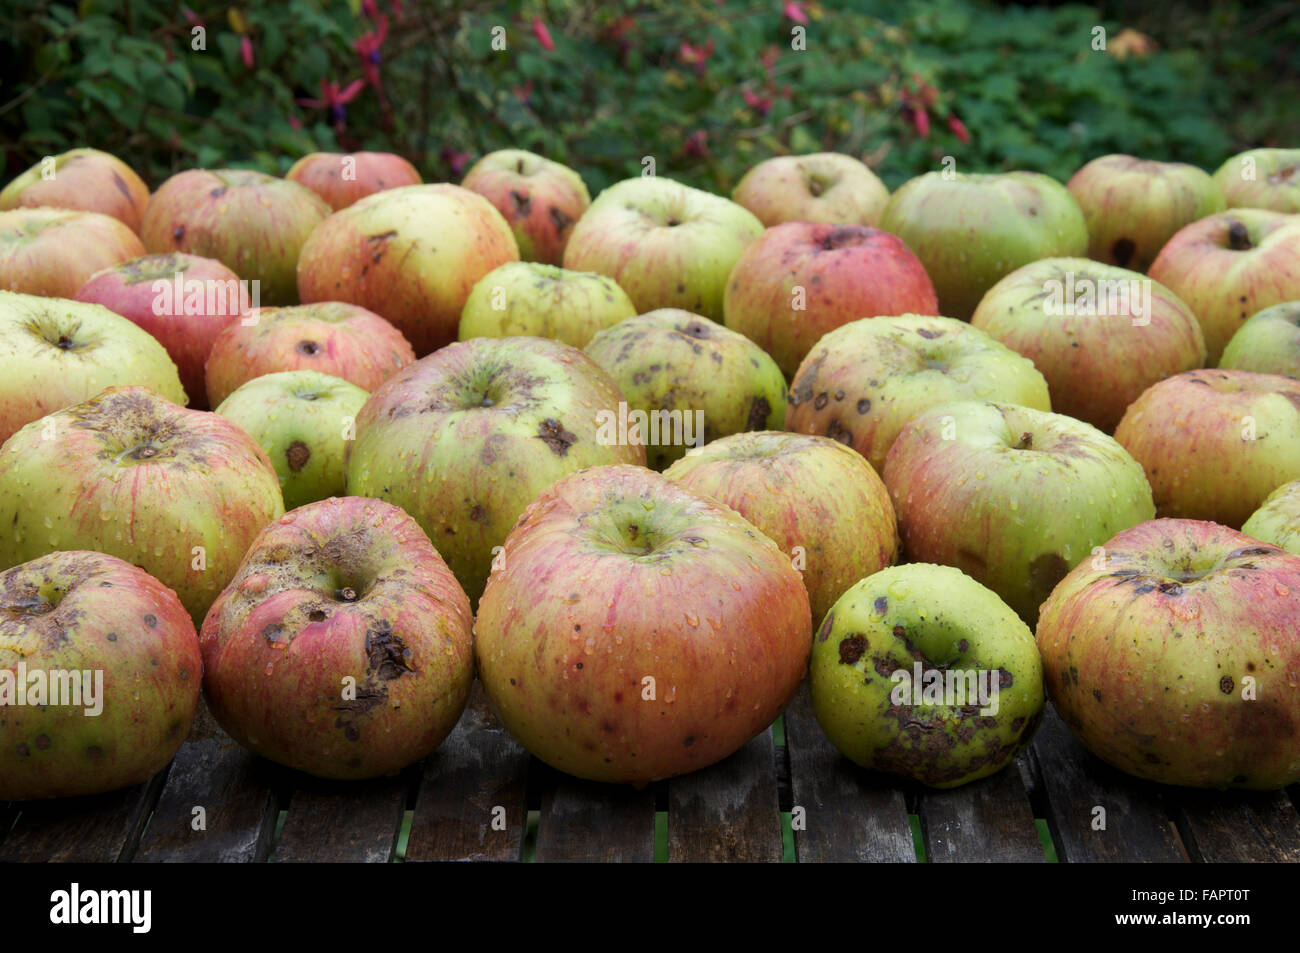 Organic cooking apples, a larger, tarter tasting cultivar of the fruit tree “Malus domestica, on a wooden garden table. England, United Kingdom. Stock Photo